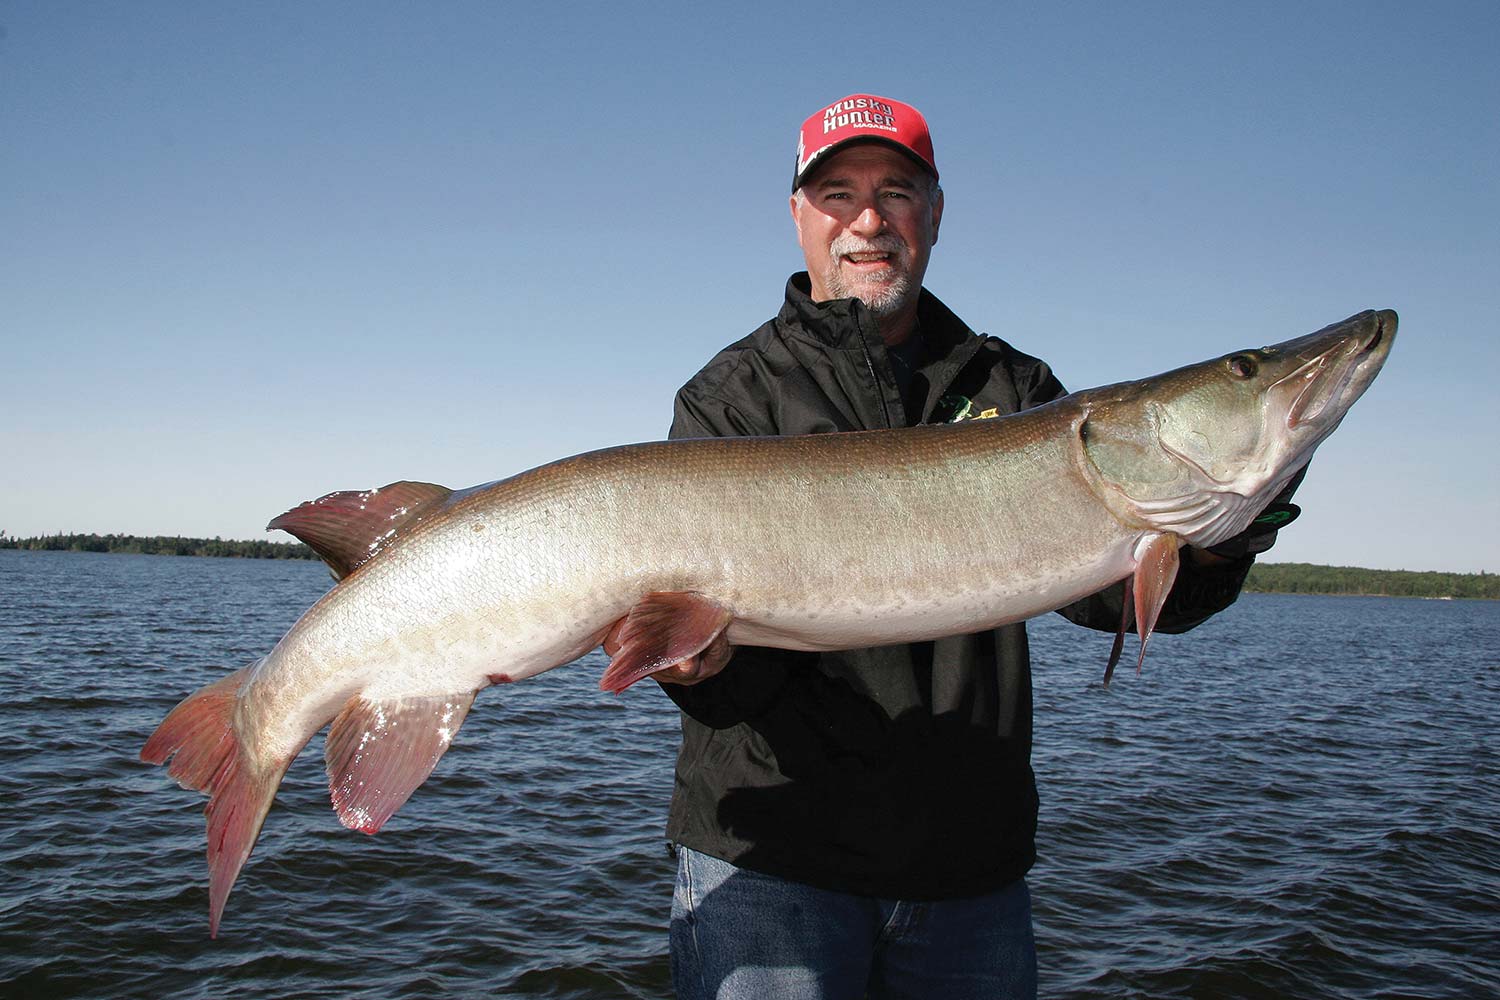 kevin schmidt holding a giant muskie